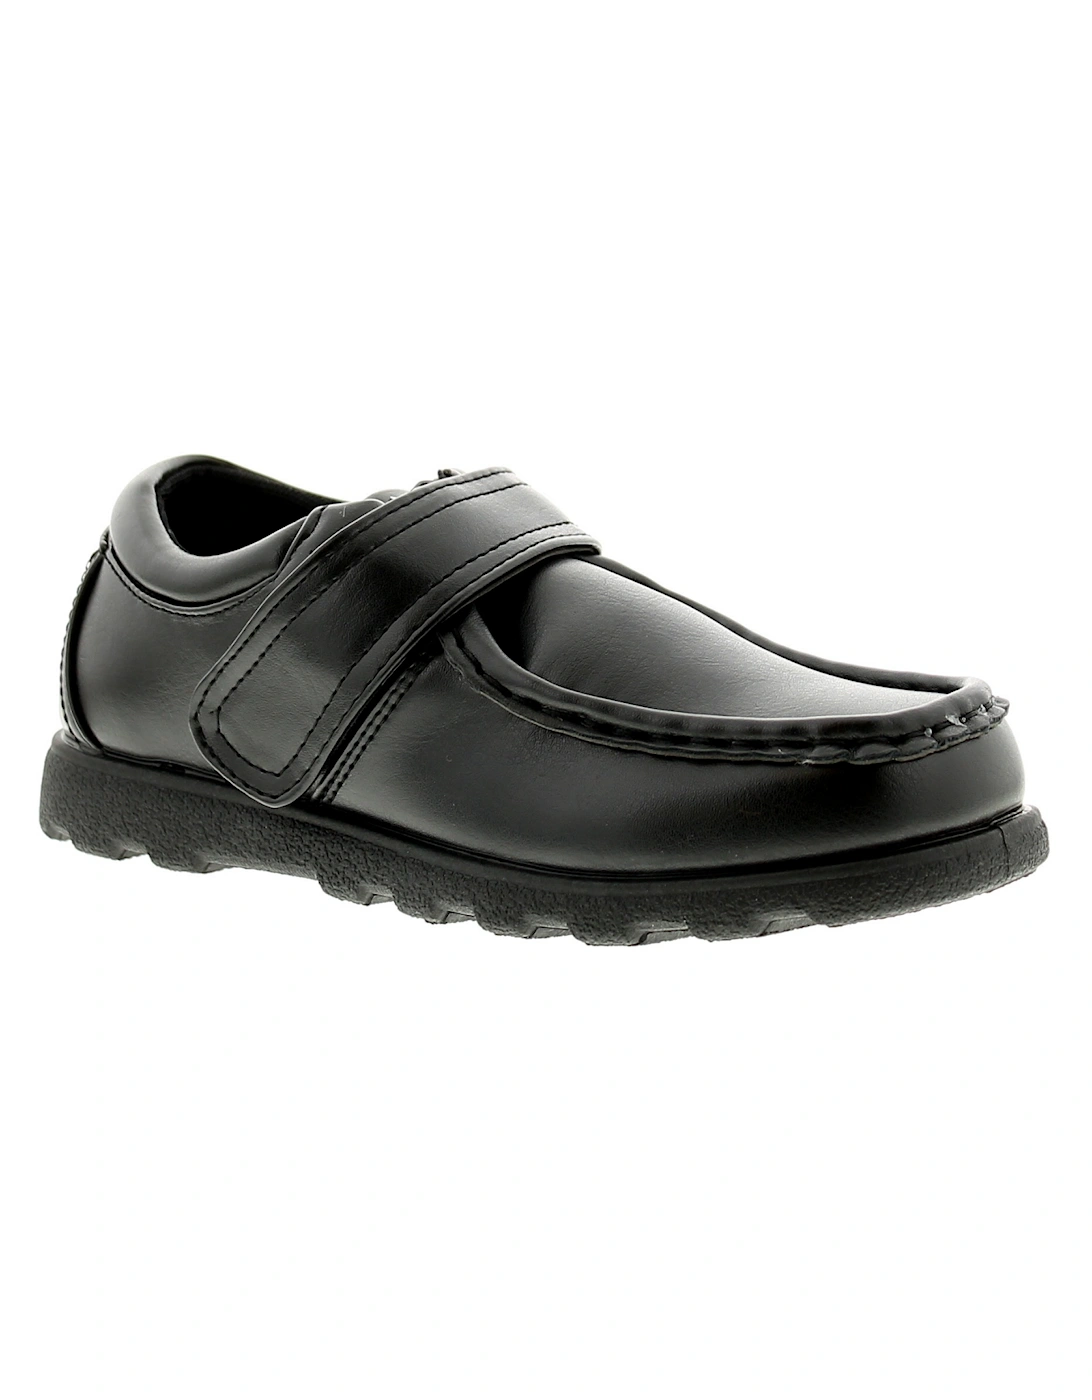 Boys School Shoes Miko Touch Fastening black UK Size, 6 of 5